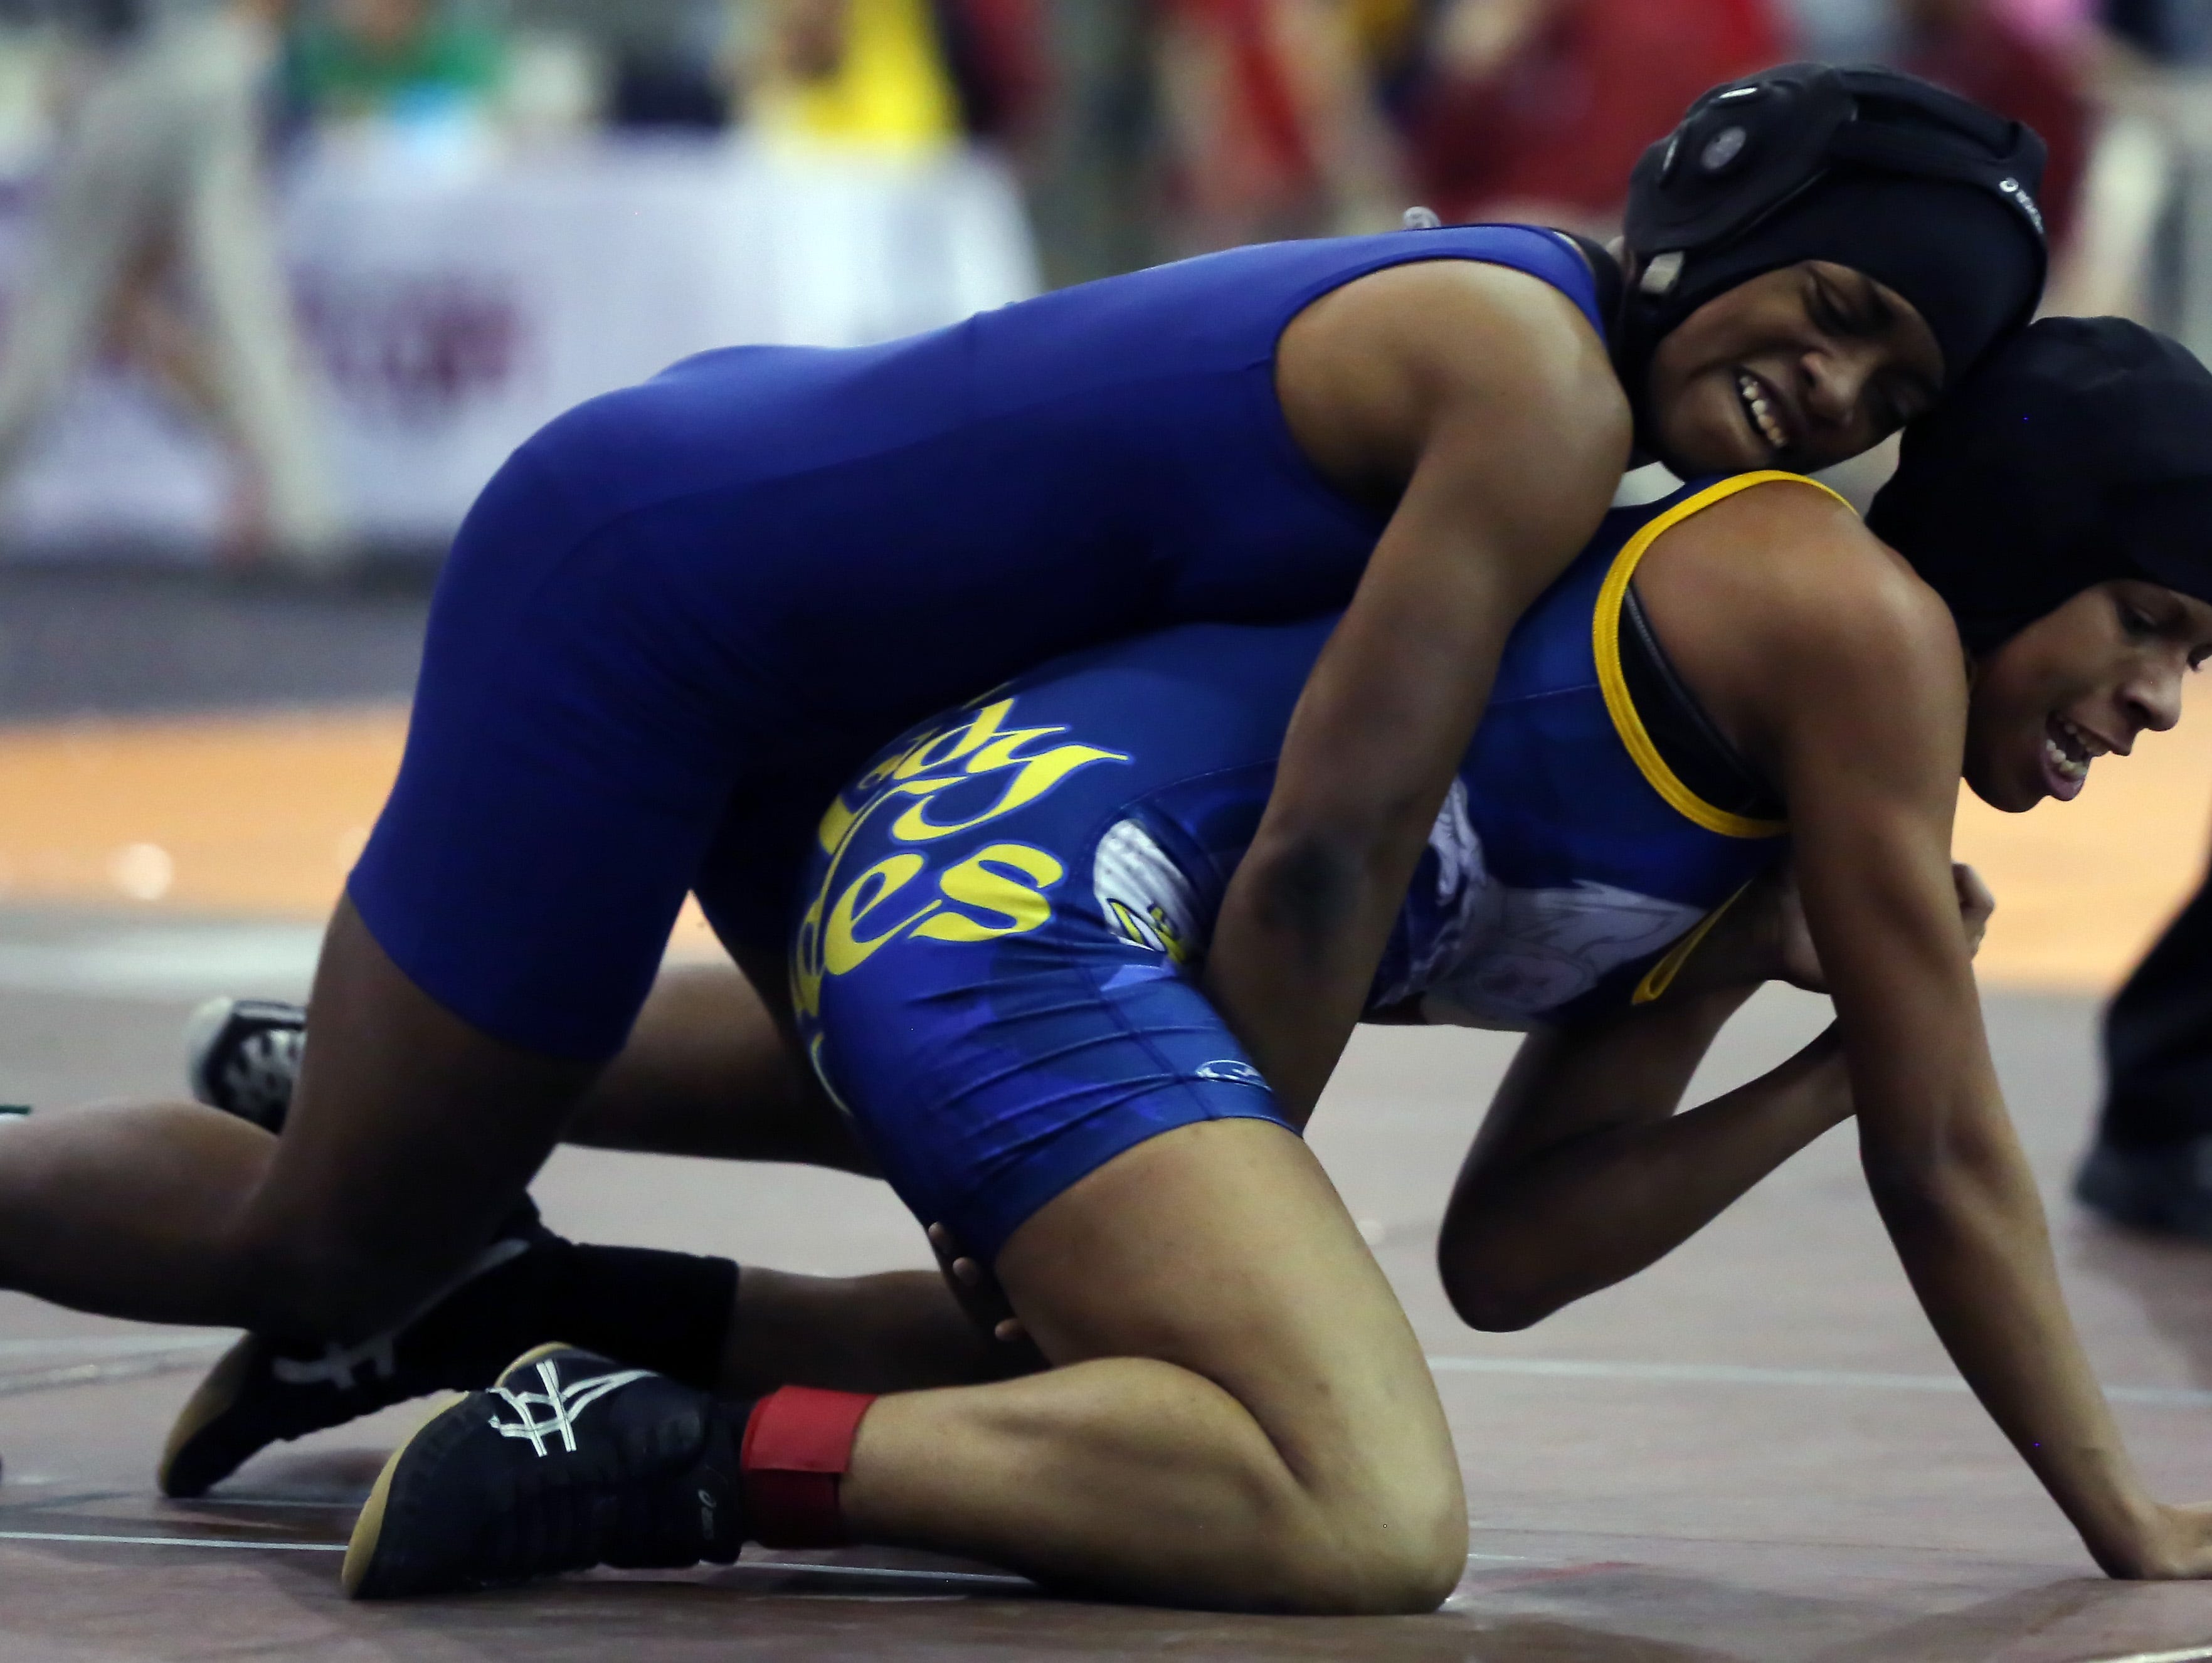 Antioch High School's Shantoia Blackburn, top in blue, wrestles Leilani Birtirrez, bottom in blue and yellow, during the 126-pound semifinals at the TSSAA State Wrestling Tournament Friday.